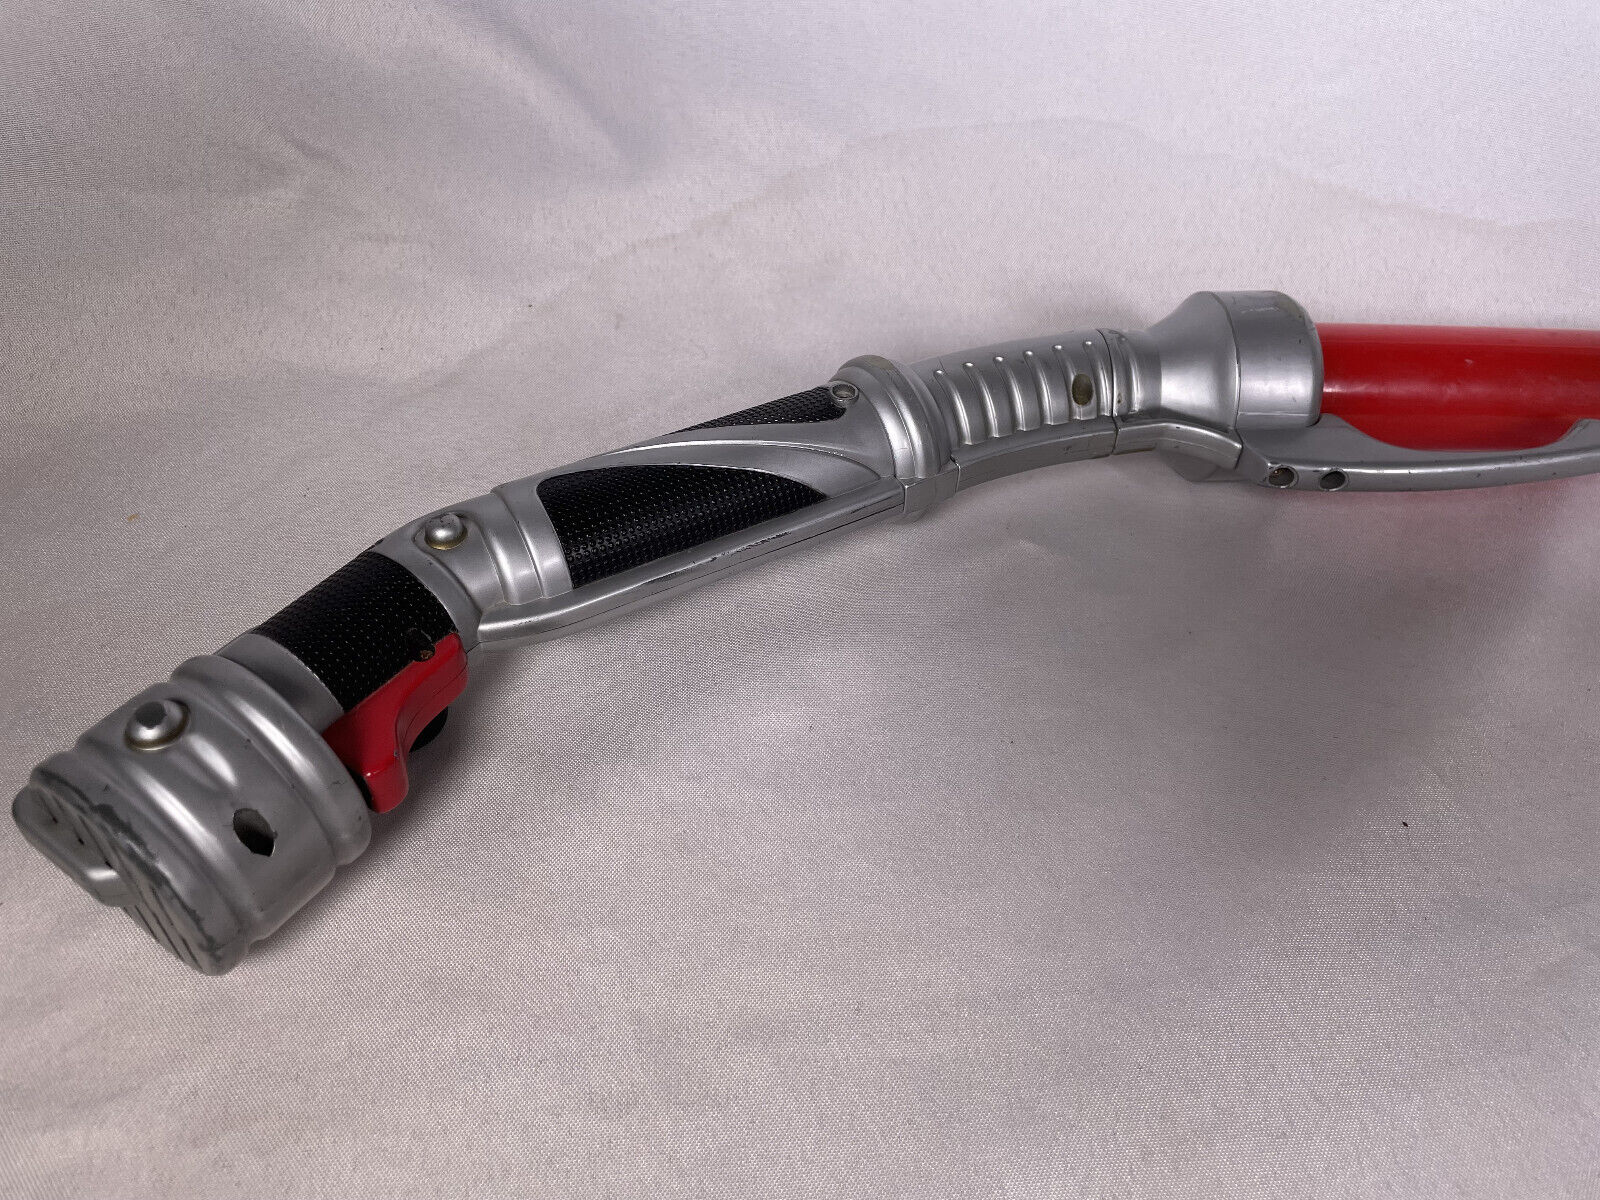 Count Dooku Red Lightsaber Star Wars Attack of the Clones Hasbro 2001